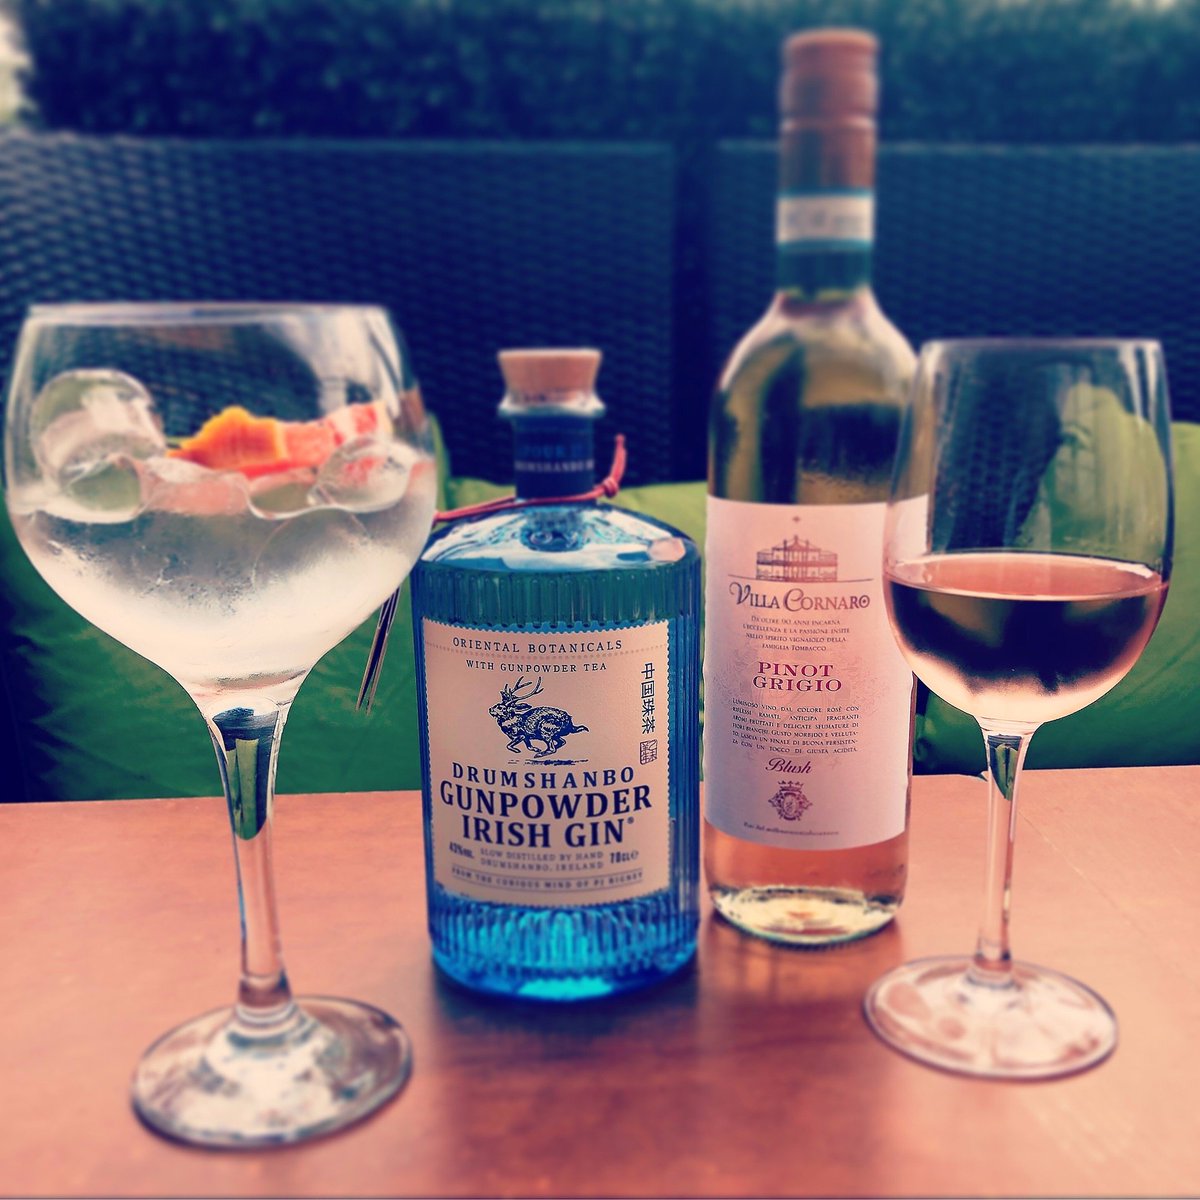 It's Friday -- start of the weekend. It's warm & sunny and we have just the thing to cool you down #friday #fridayfeeling #thankcrunchie #noworktillmonday #sunterrace #suntrap #beergarden #gunpowdergin #craftgin #wine #rose #pinotgrigio